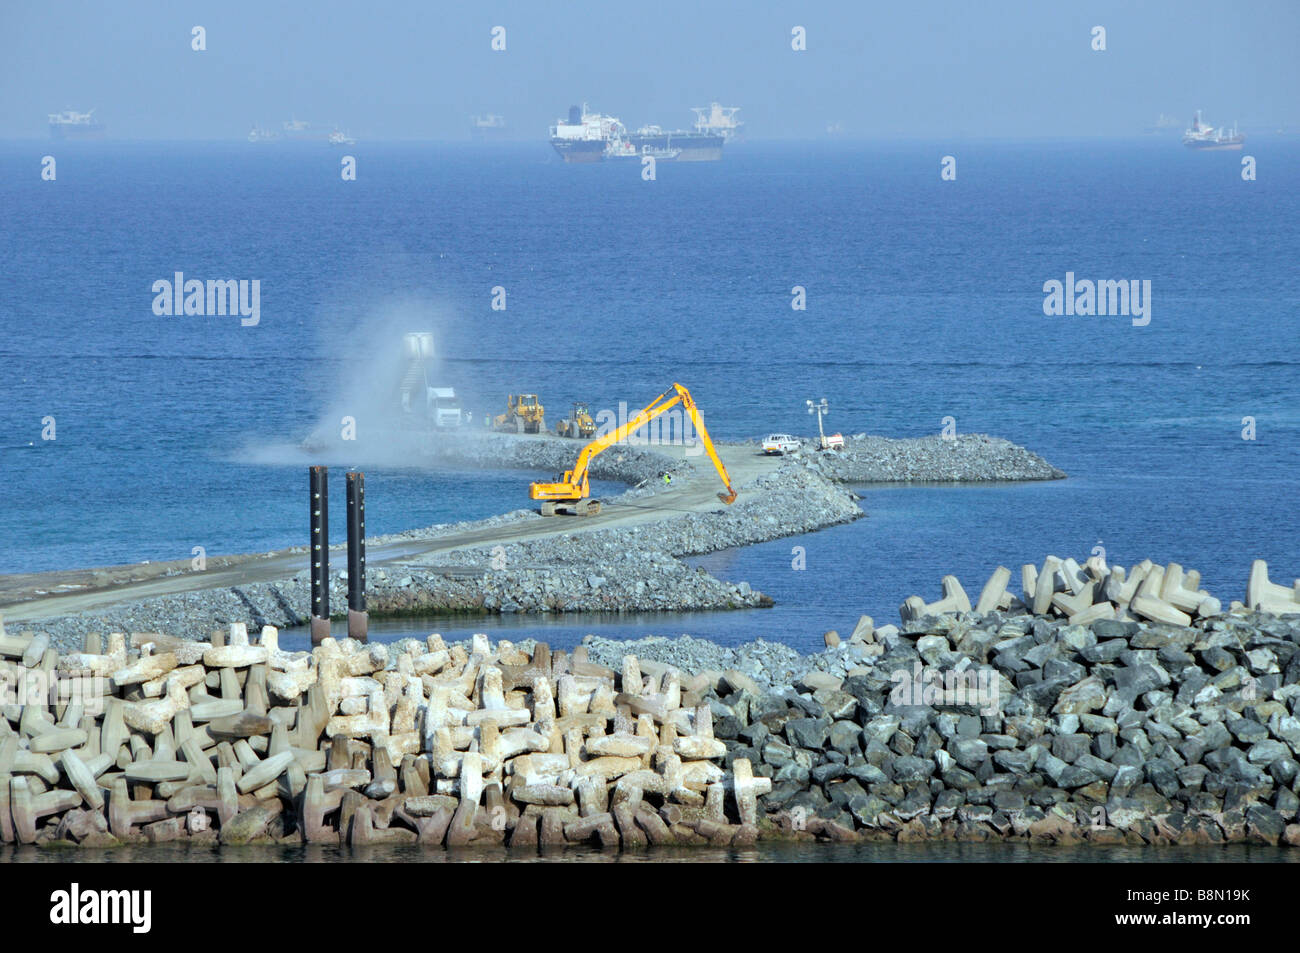 Civil Engineering infrastructure project extending port facilities off shore beyond Dolosse type harbour sea defences Fujairah port Gulf of Oman UAE Stock Photo